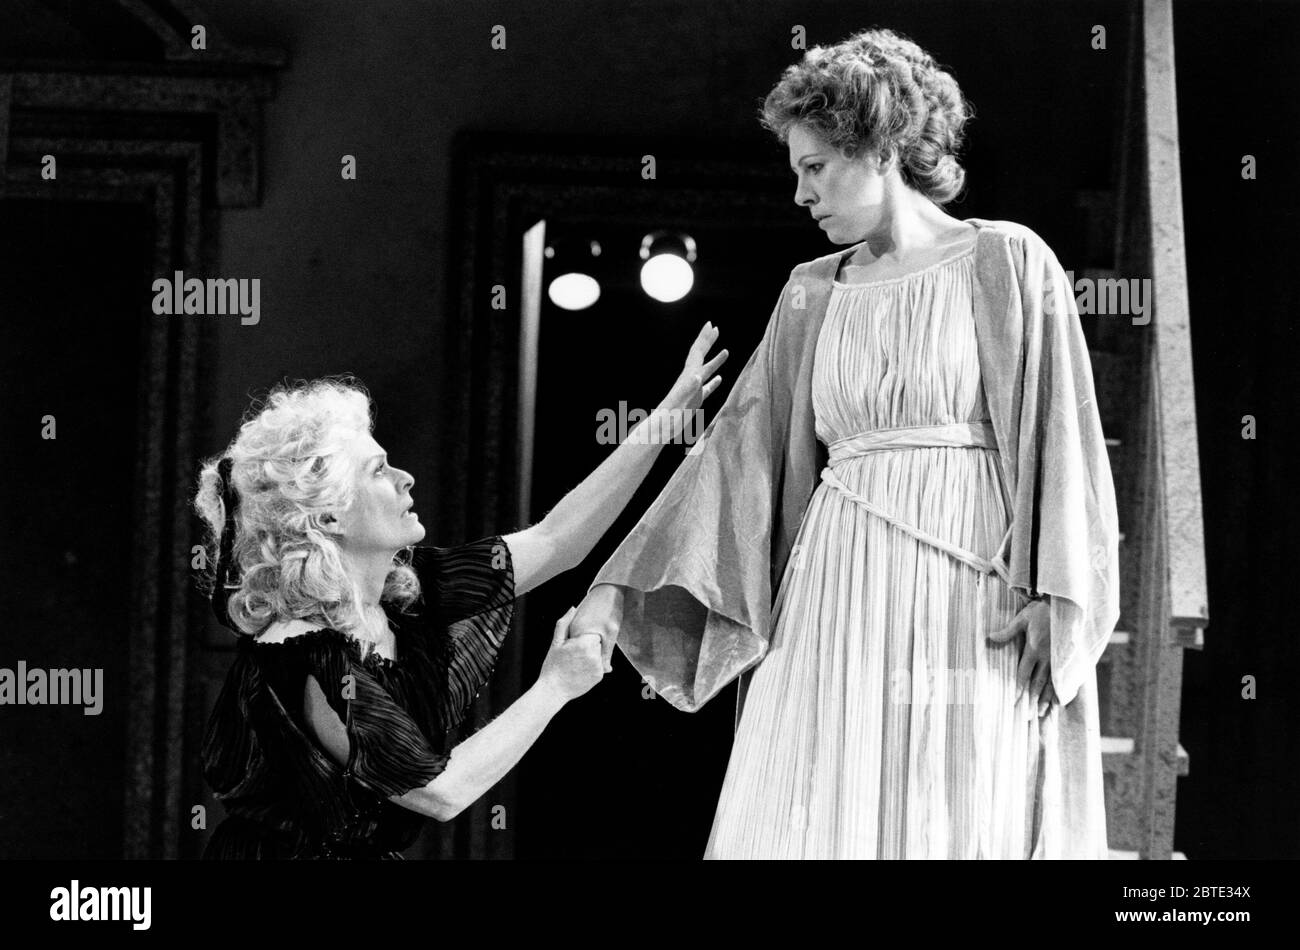 l-r: Janet Suzman (Andromache), Penelope Wilton (Hermione) in ANDROMACHE by Racine at The Old Vic, London SE1 19/01/1988  translated by Eric Korn design: Richard Hudson lighting: Davy Cunningham director: Jonathan Miller Stock Photo